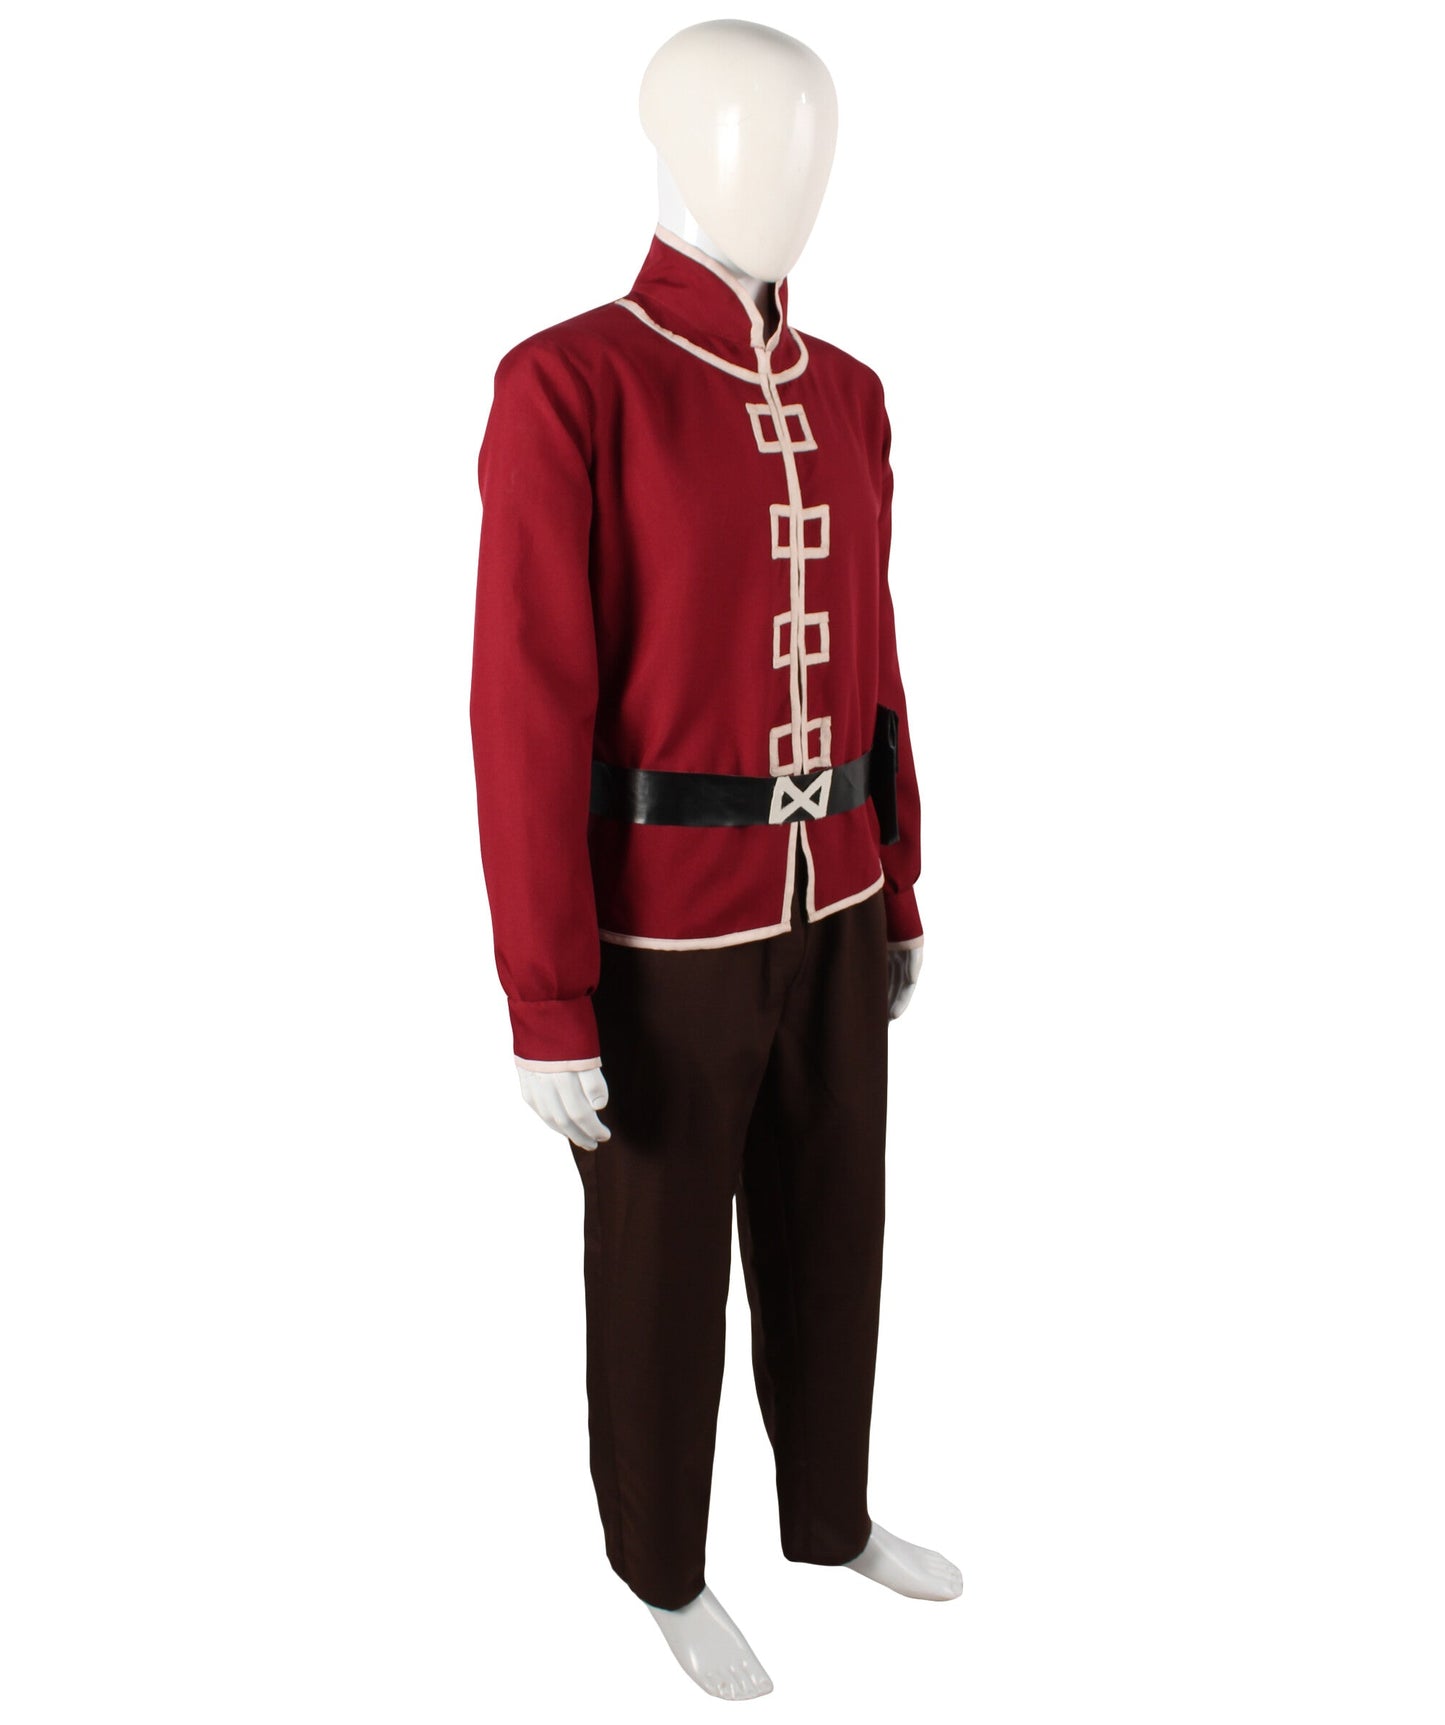 Men’s Fantasy Animated Series Crown Prince Costume | Perfect for Halloween and Fancy